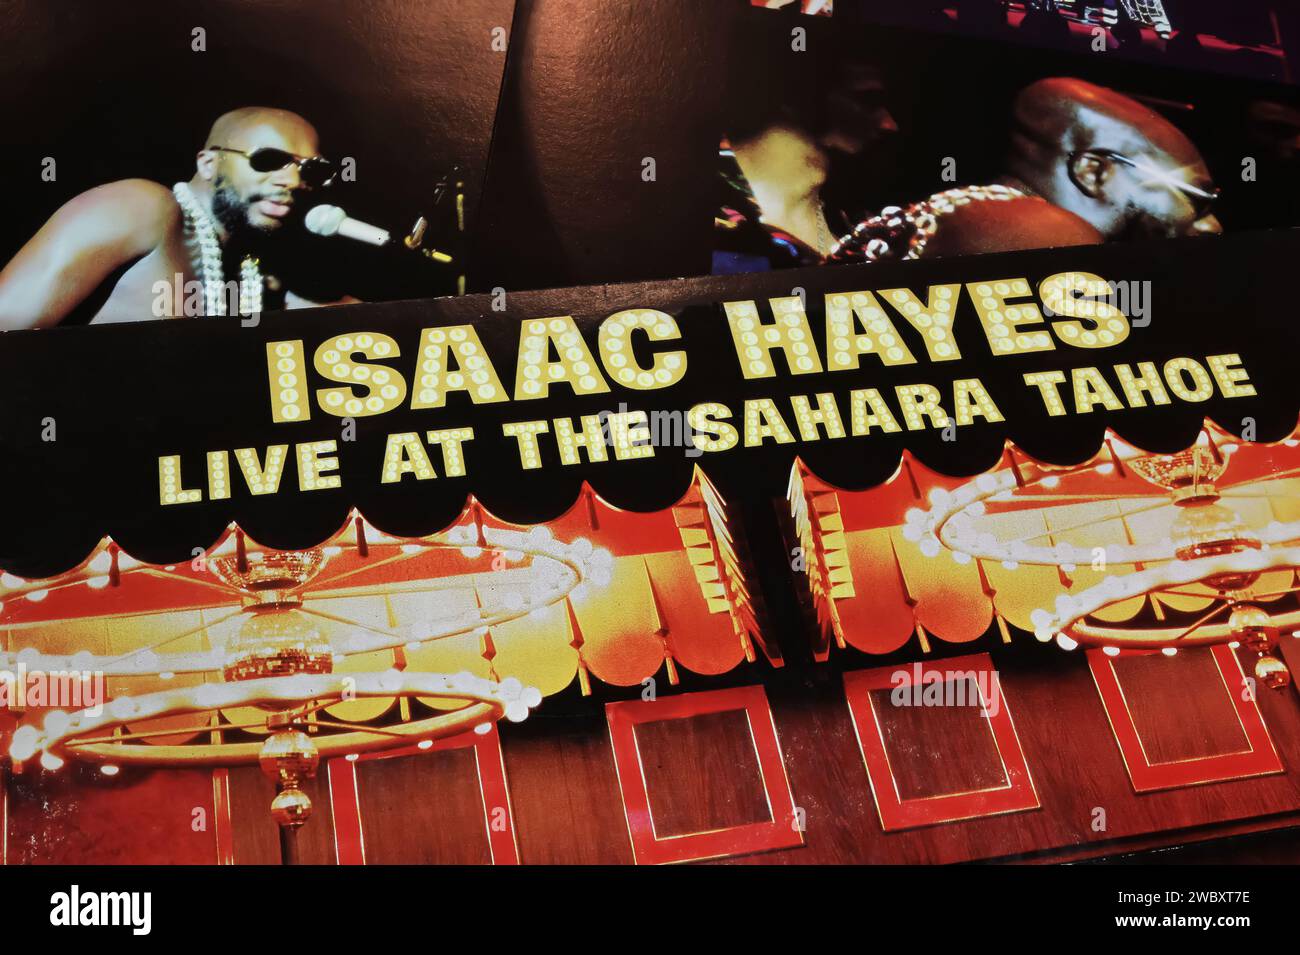 Viersen, Germany - May 9. 2023: Closeup of soul singer Isaac Hayes concert vinyl record album cover Live at sahara tahoe from 1973 Stock Photo